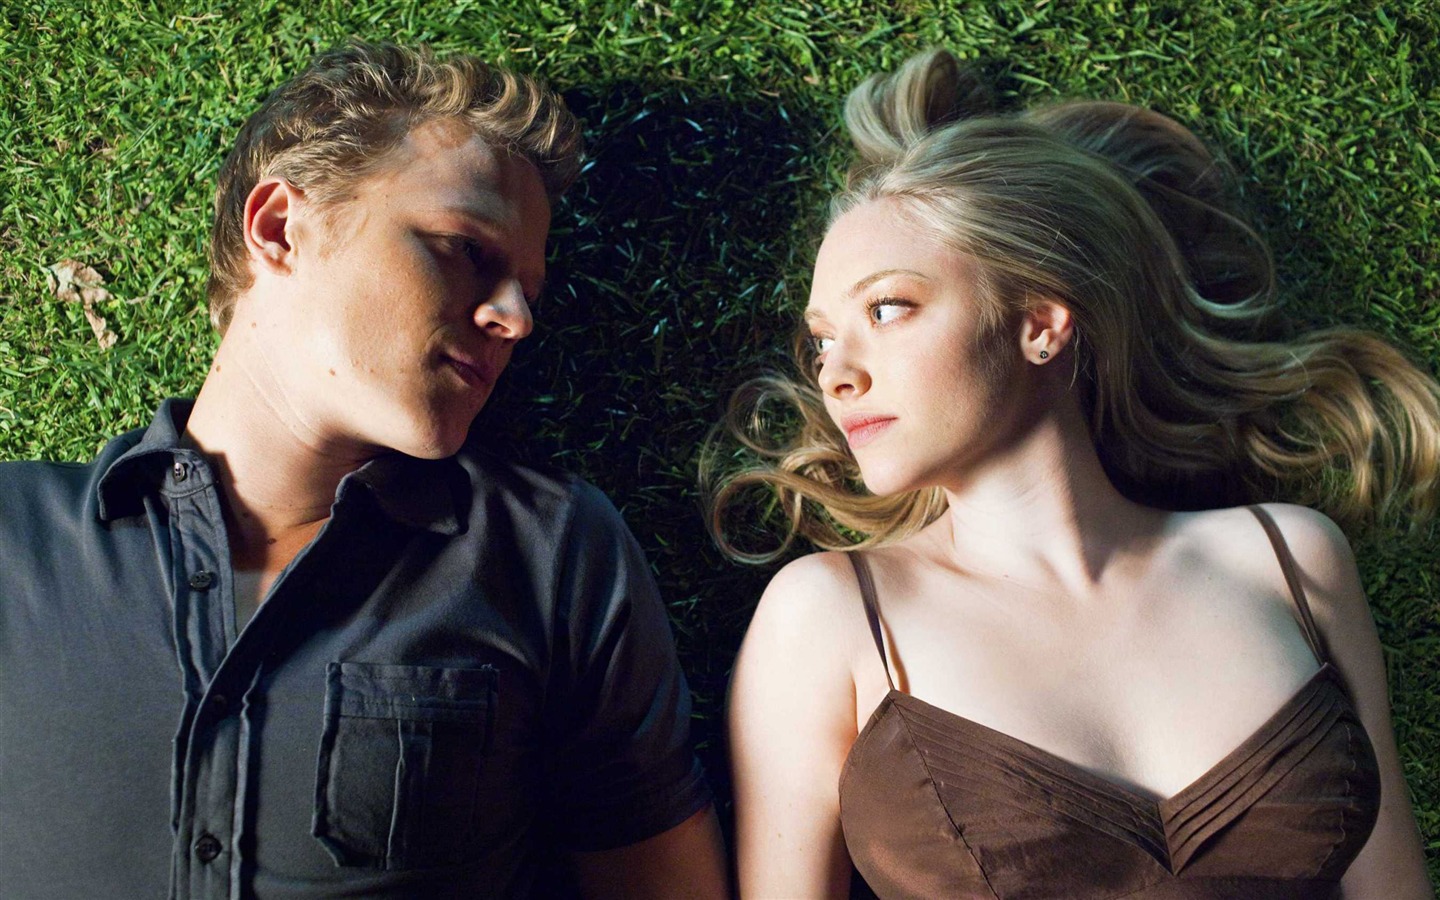 Letters to Juliet 给朱丽叶的信 高清壁纸6 - 1440x900